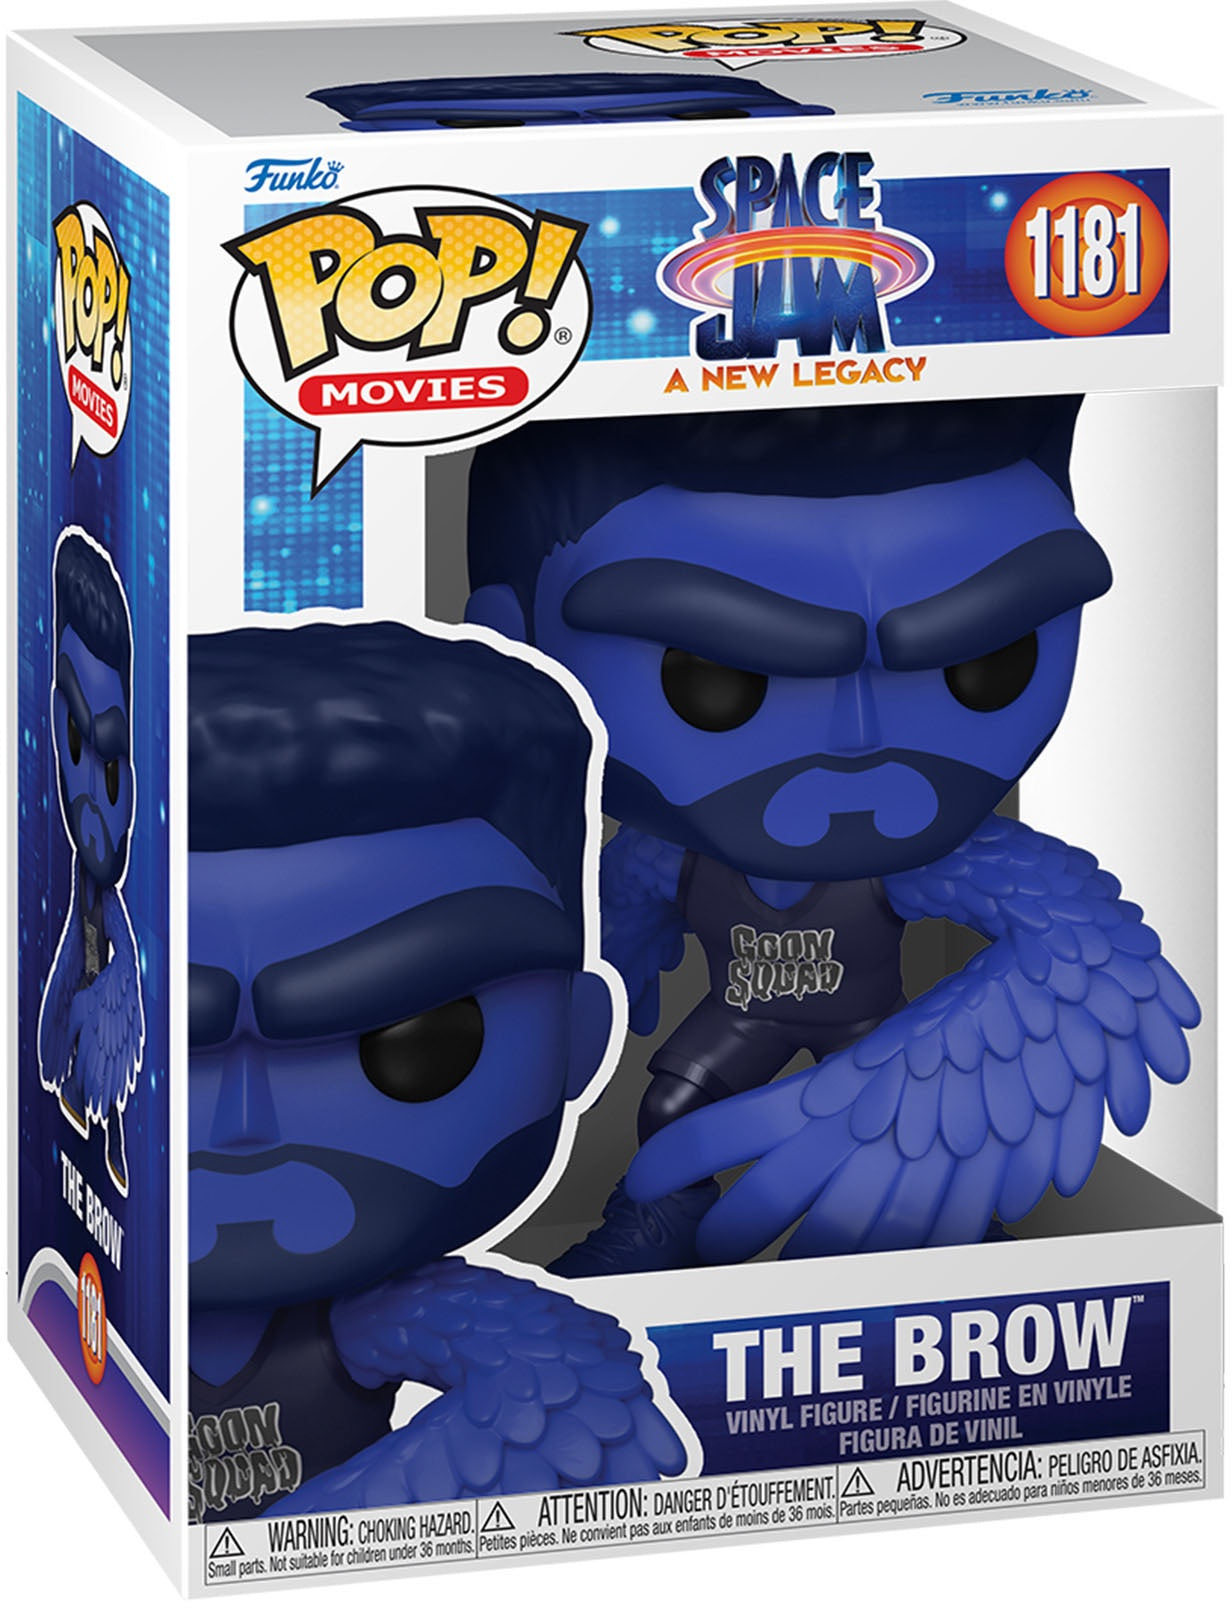 Funko POP! Movies: Space Jam A New Legacy - The Brow #1181 Vinyl Figure